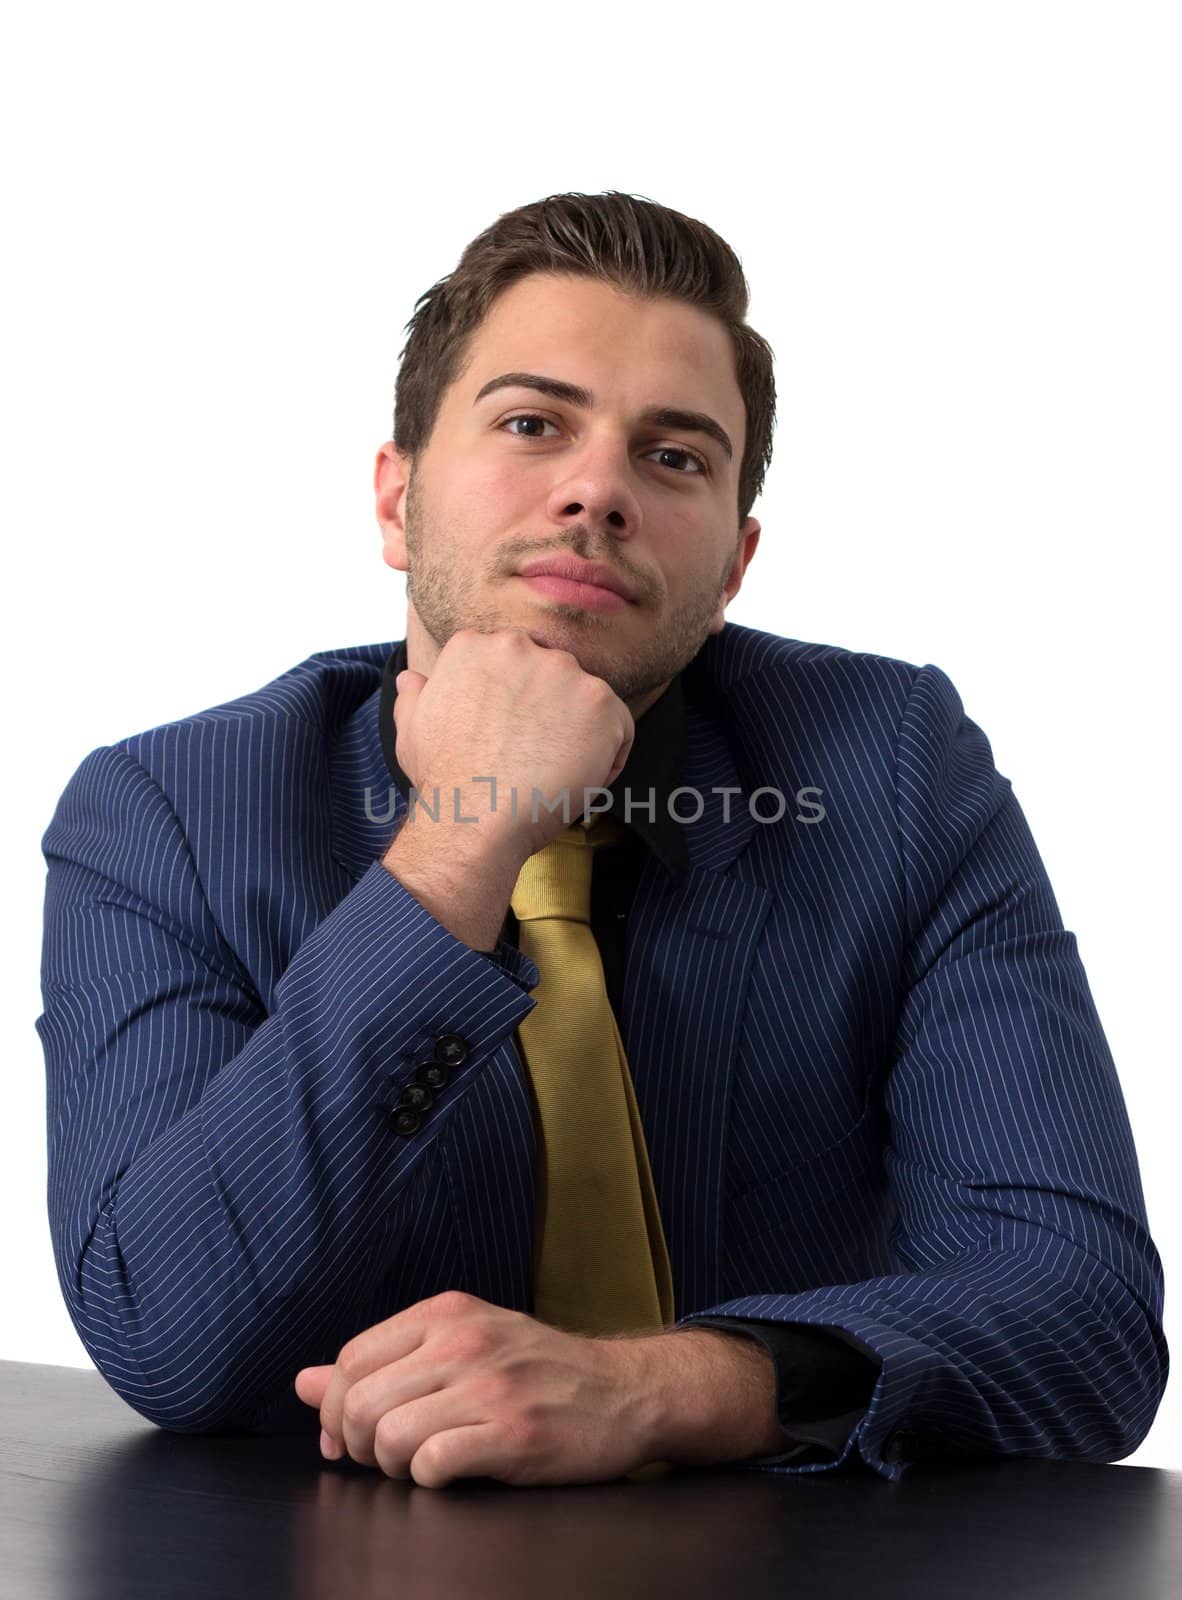 Thoughtful businessman in a blue suit with golden tie